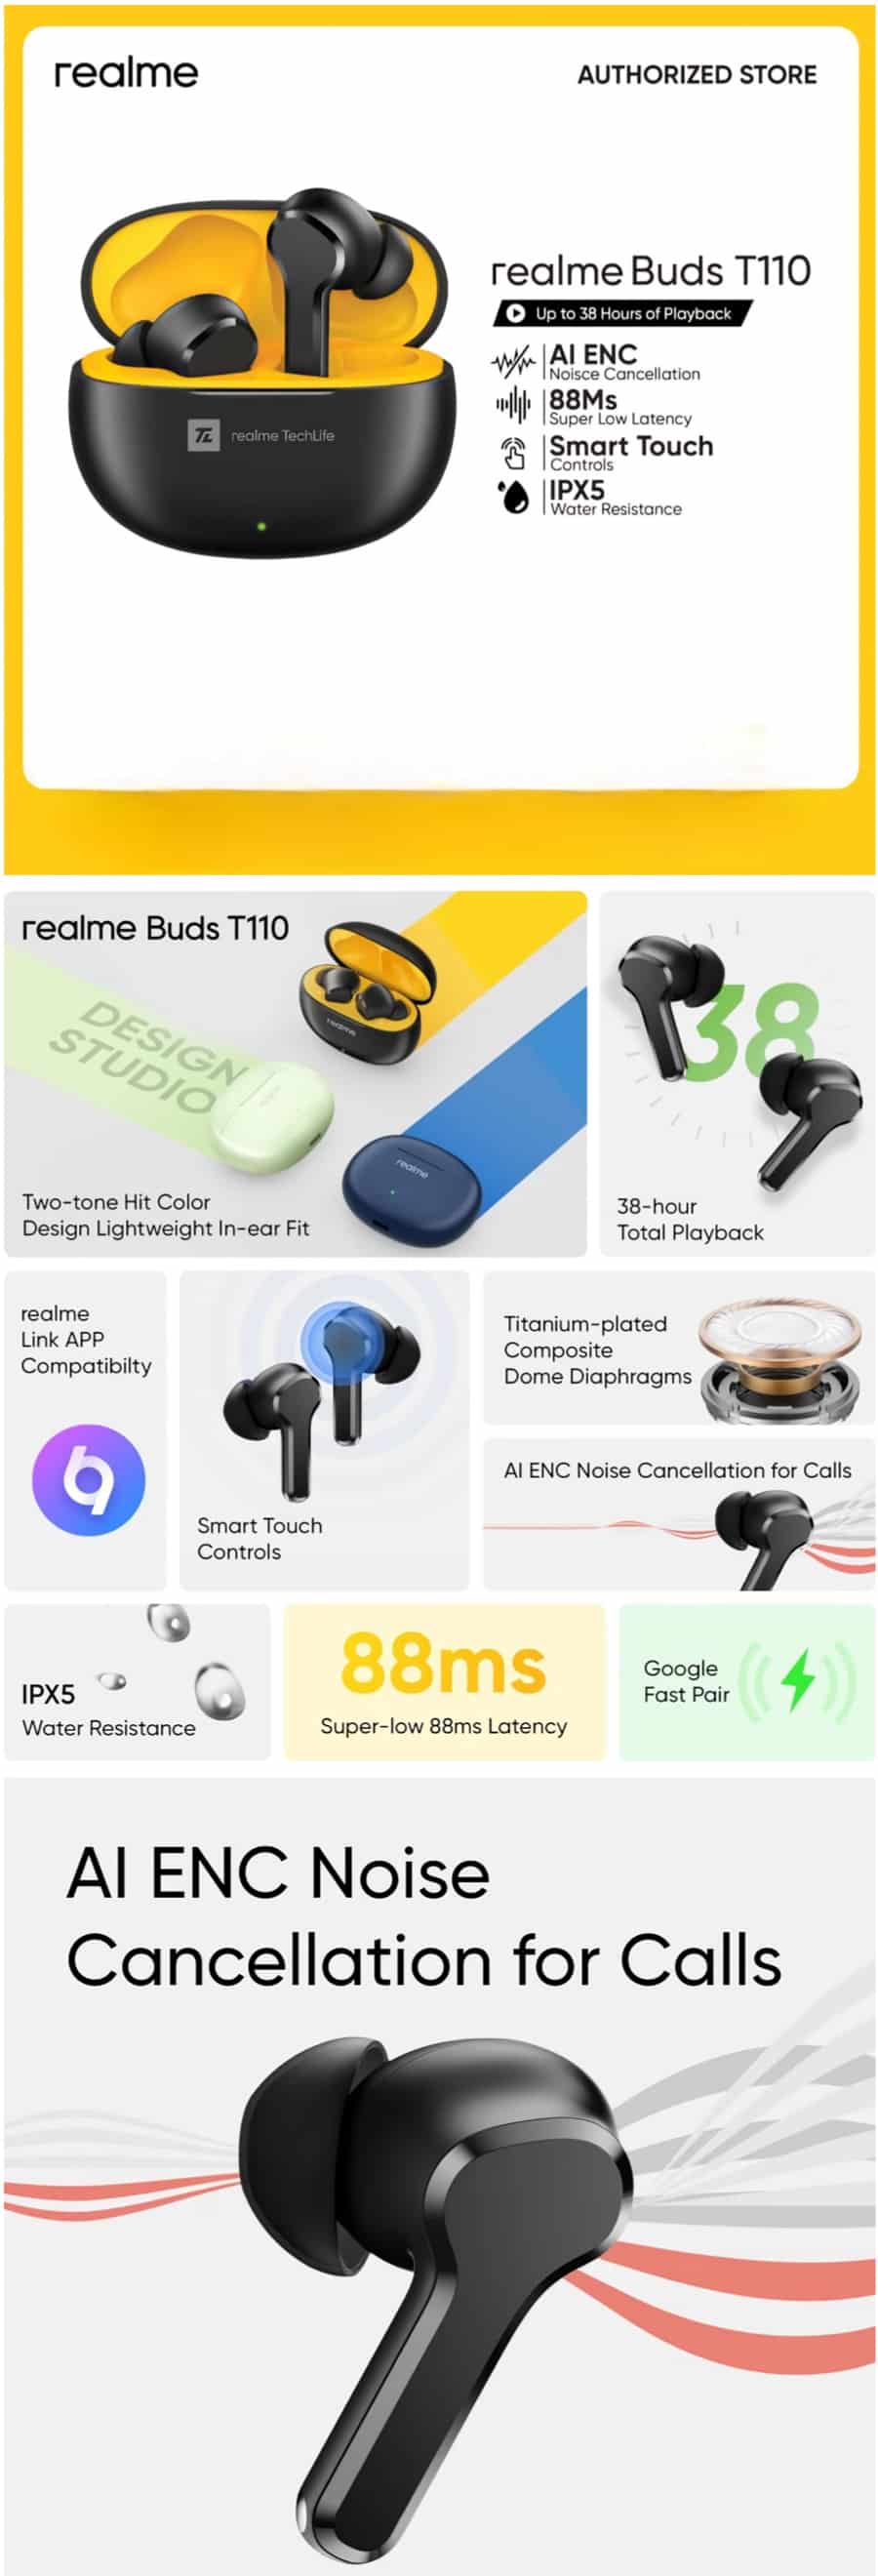 Realme Buds T110 Earbuds